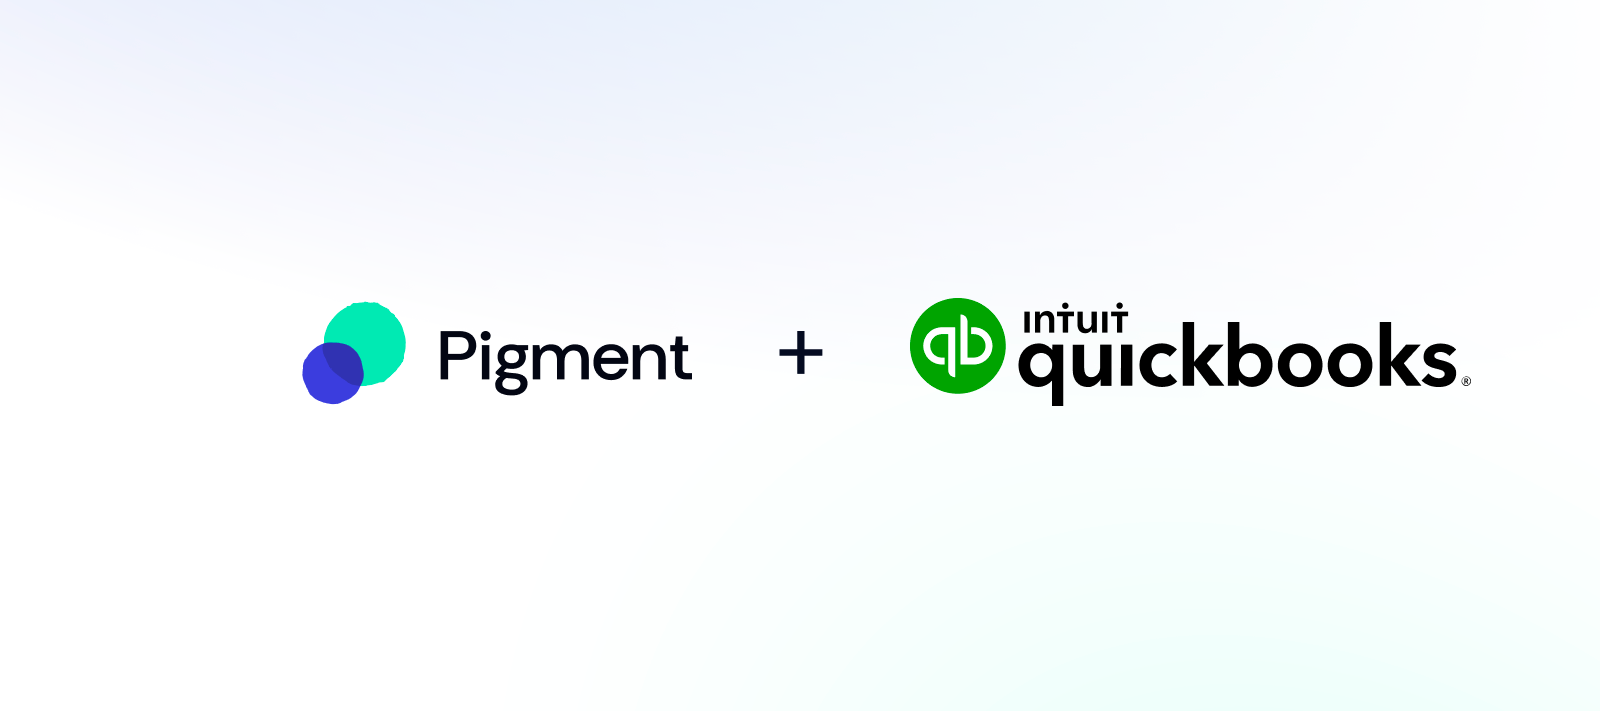 Connect Pigment with Intuit QuickBooks